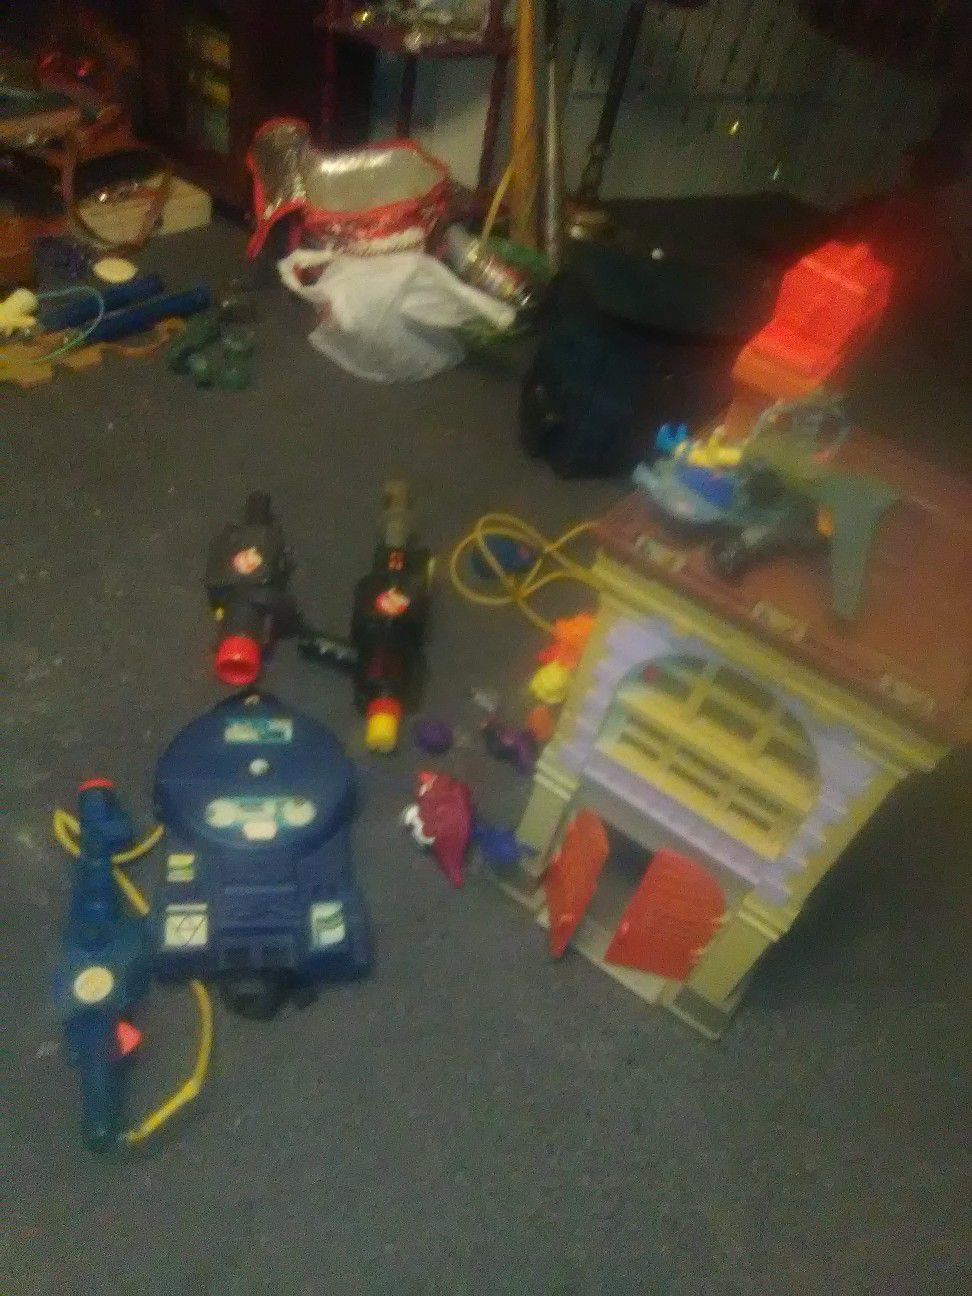 Vintage ghost busters toys